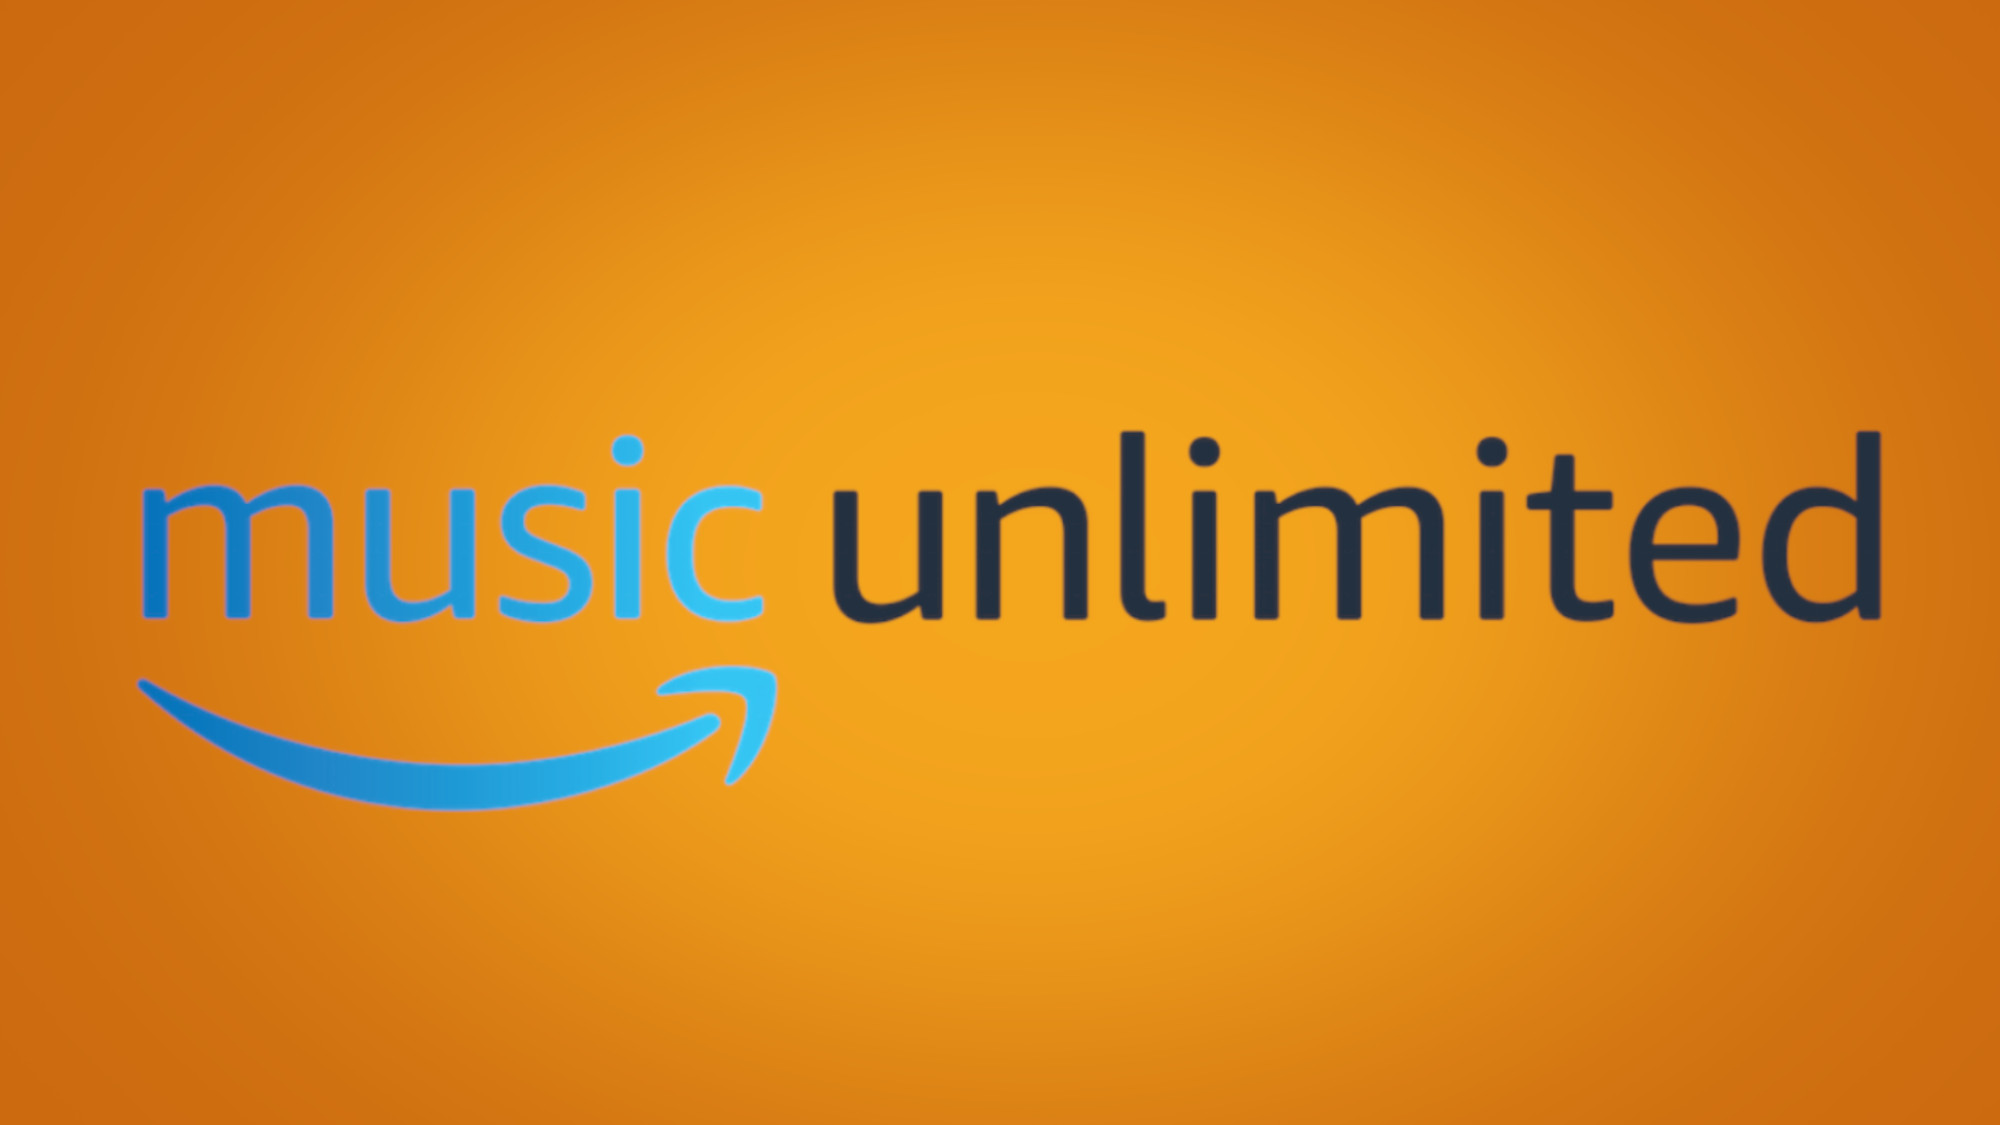 Amazon Music Unlimited is free for 3 months act quickly and save 24